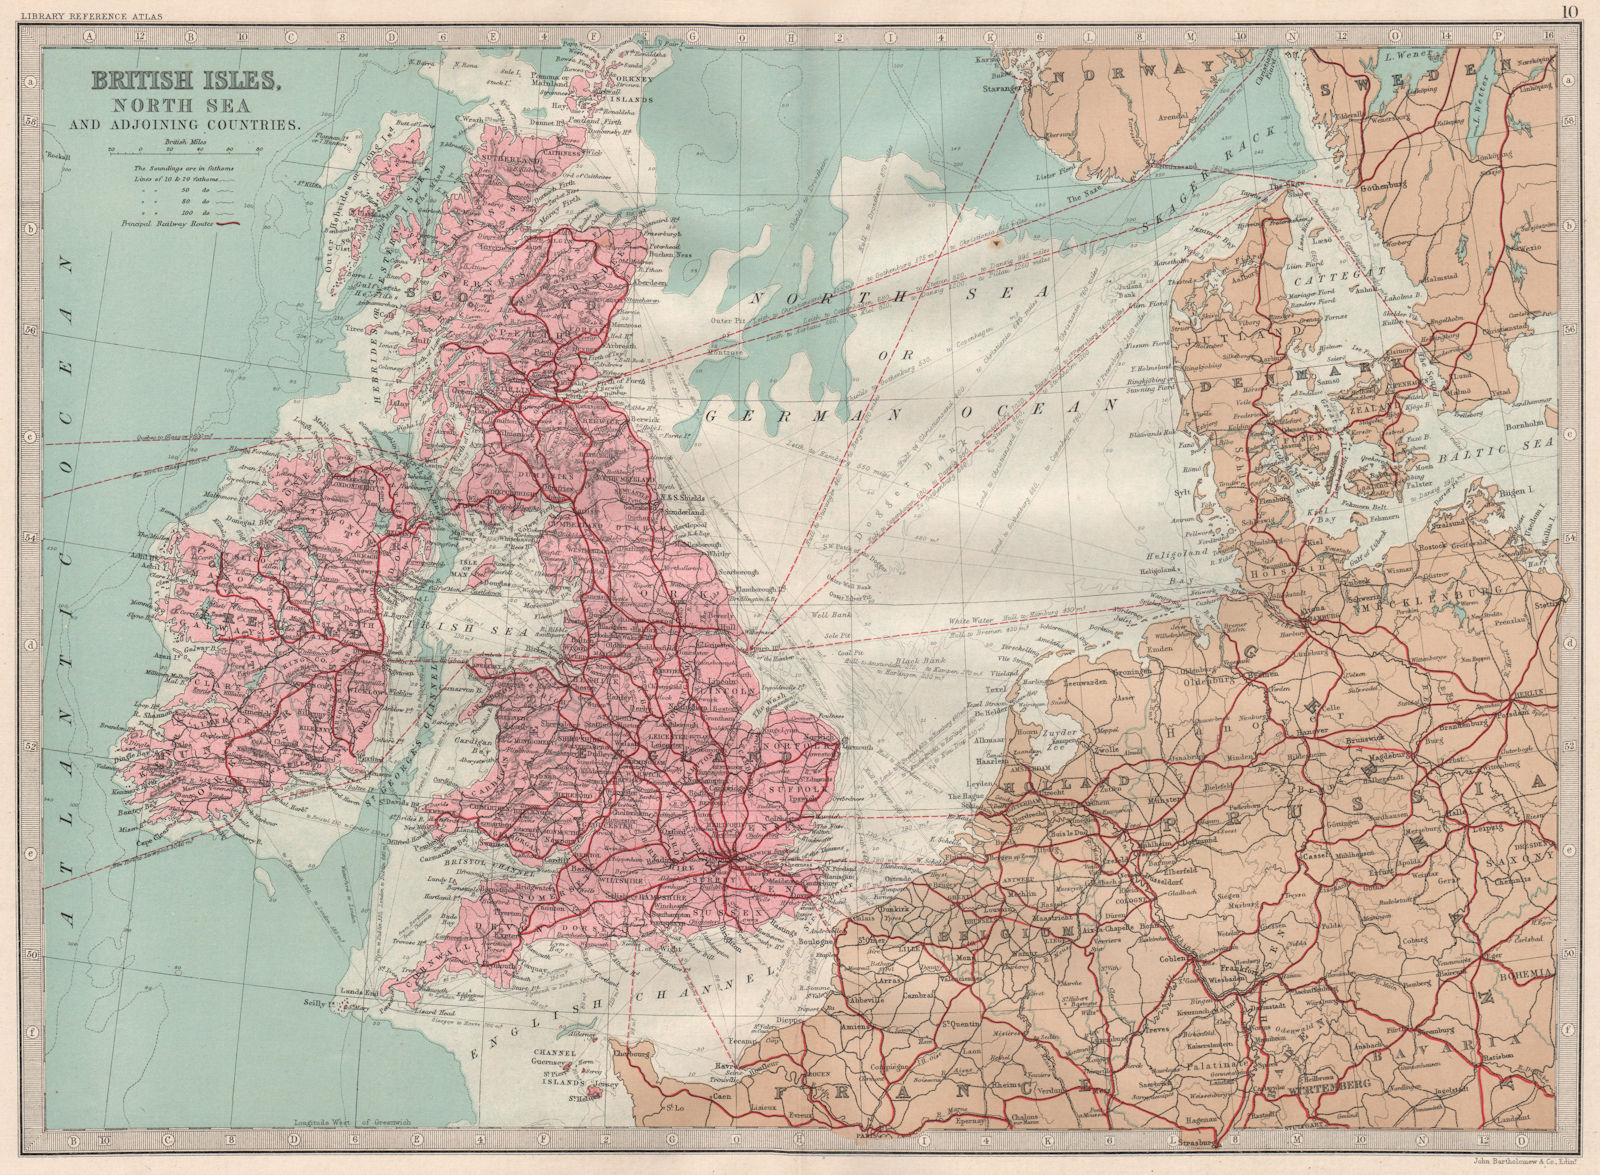 NORTH WEST EUROPE. British Isles North Sea & Adjoining Countries 1890 old map